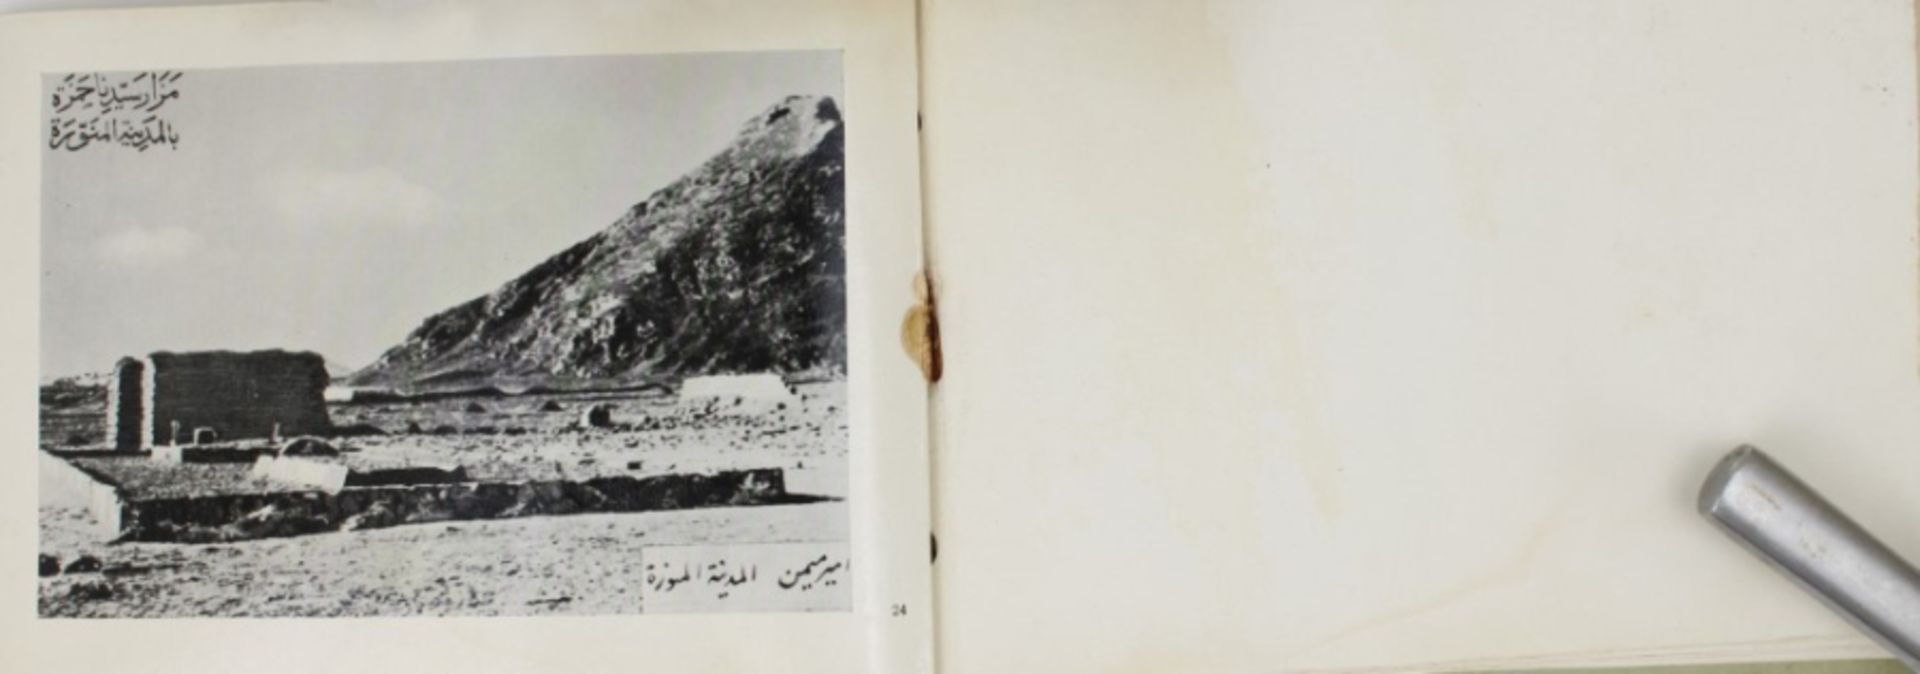 1930 Album with photographs of Mecca - Image 23 of 24